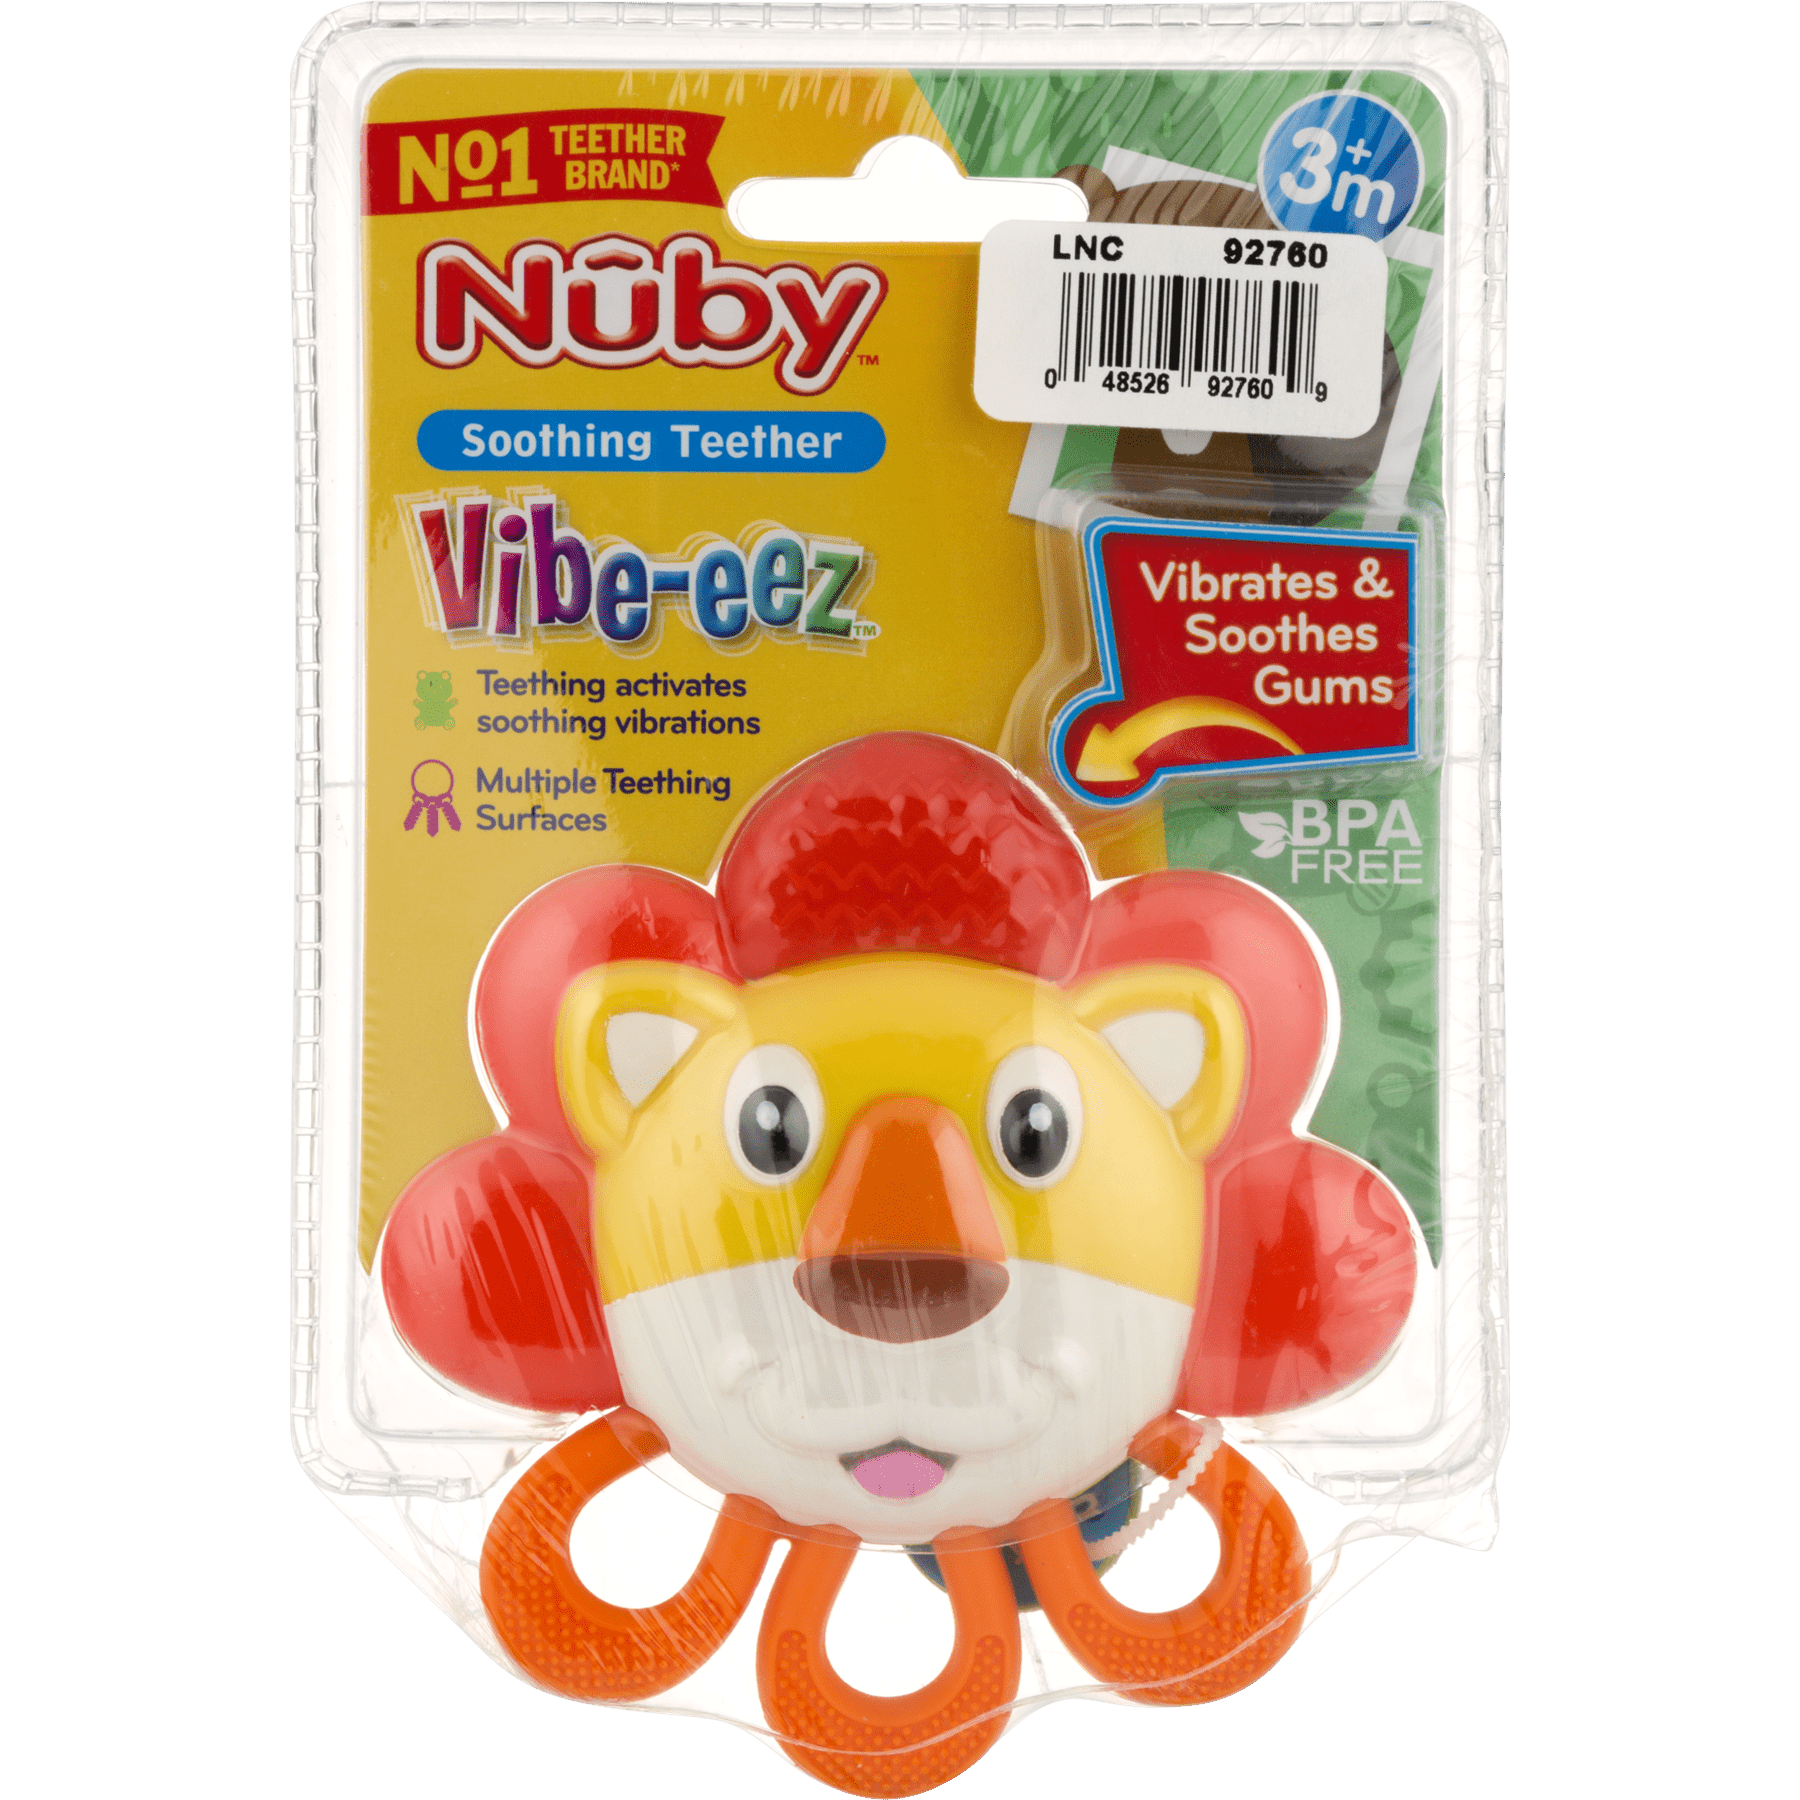 Nuby Vibe-eez Soothing Teether, Lion 